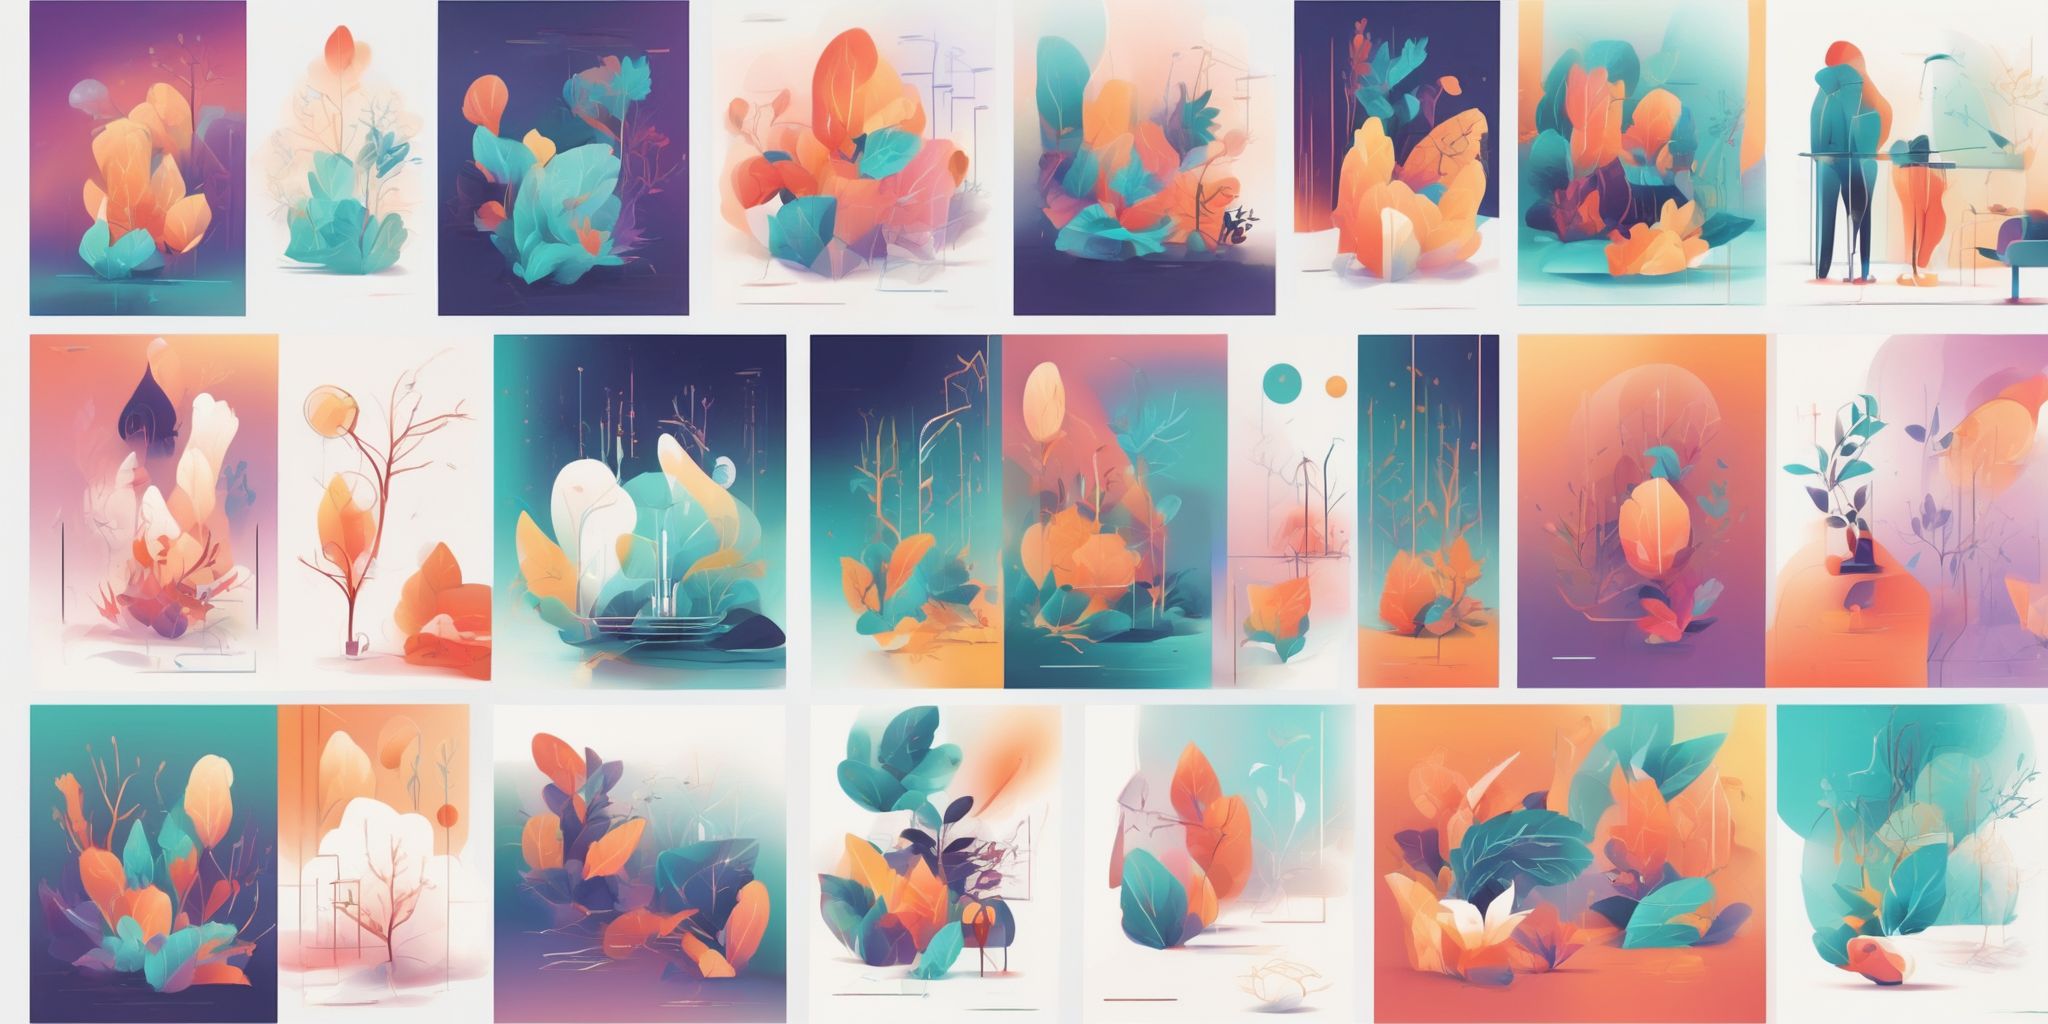 Case studies in illustration style with gradients and white background